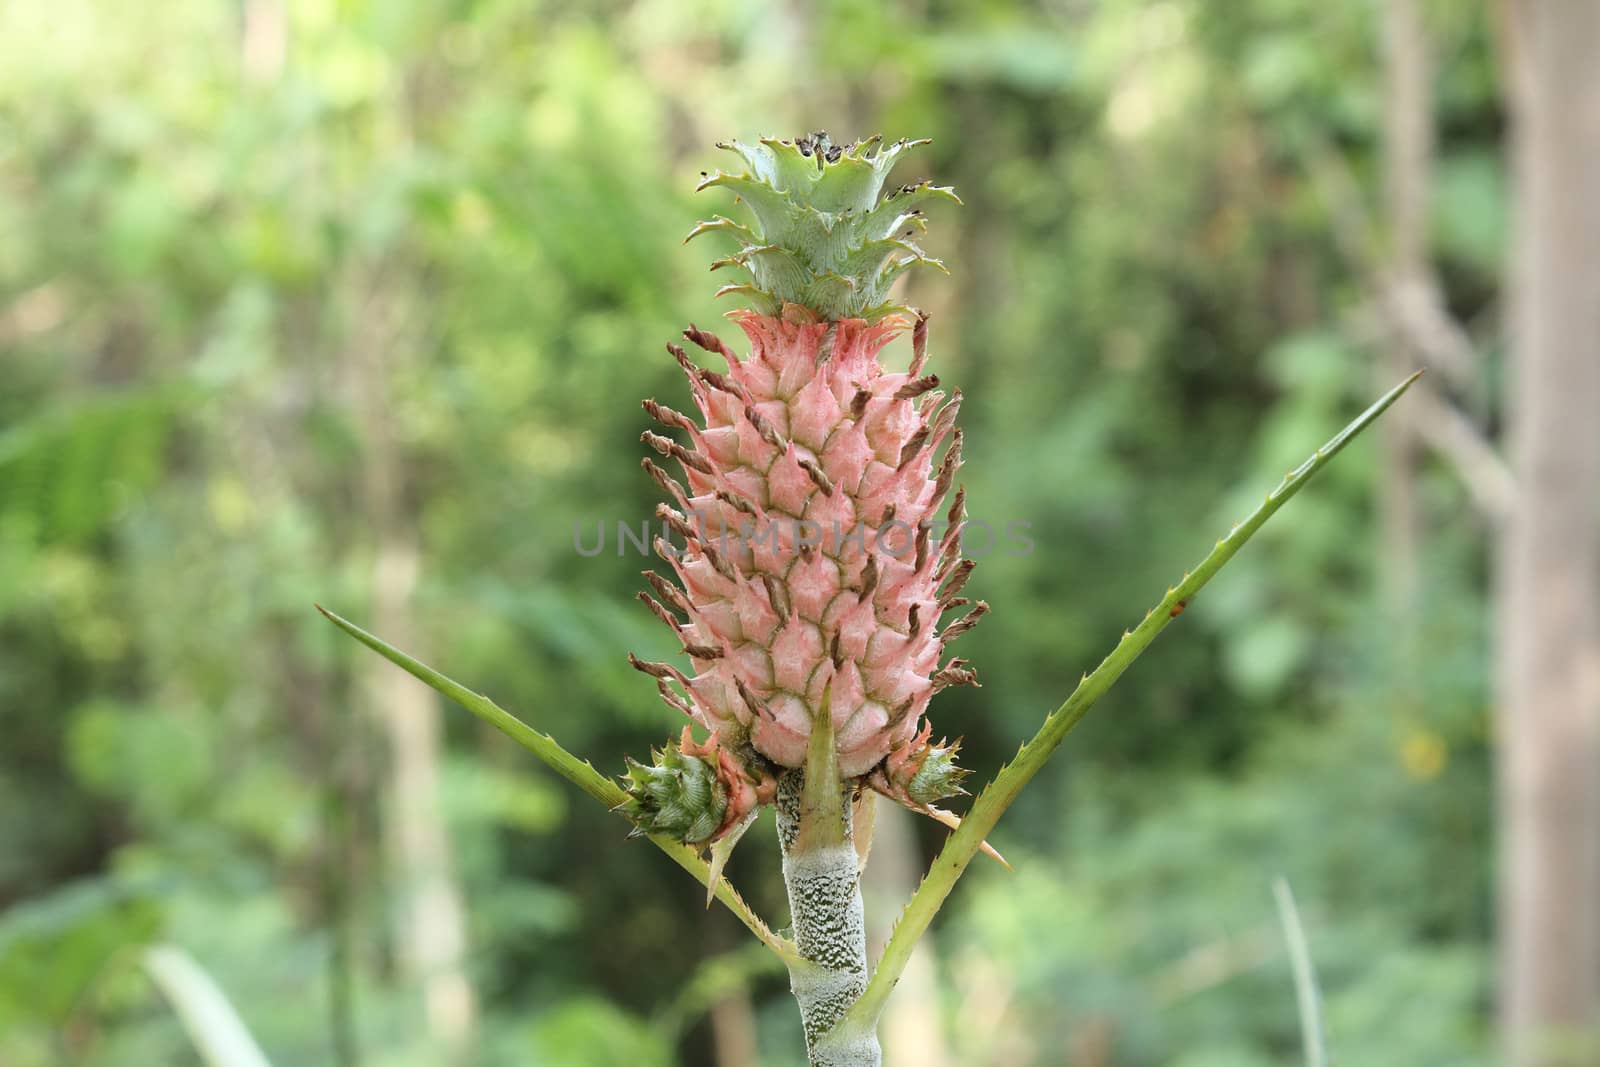 Pineapple fruit and plant growing